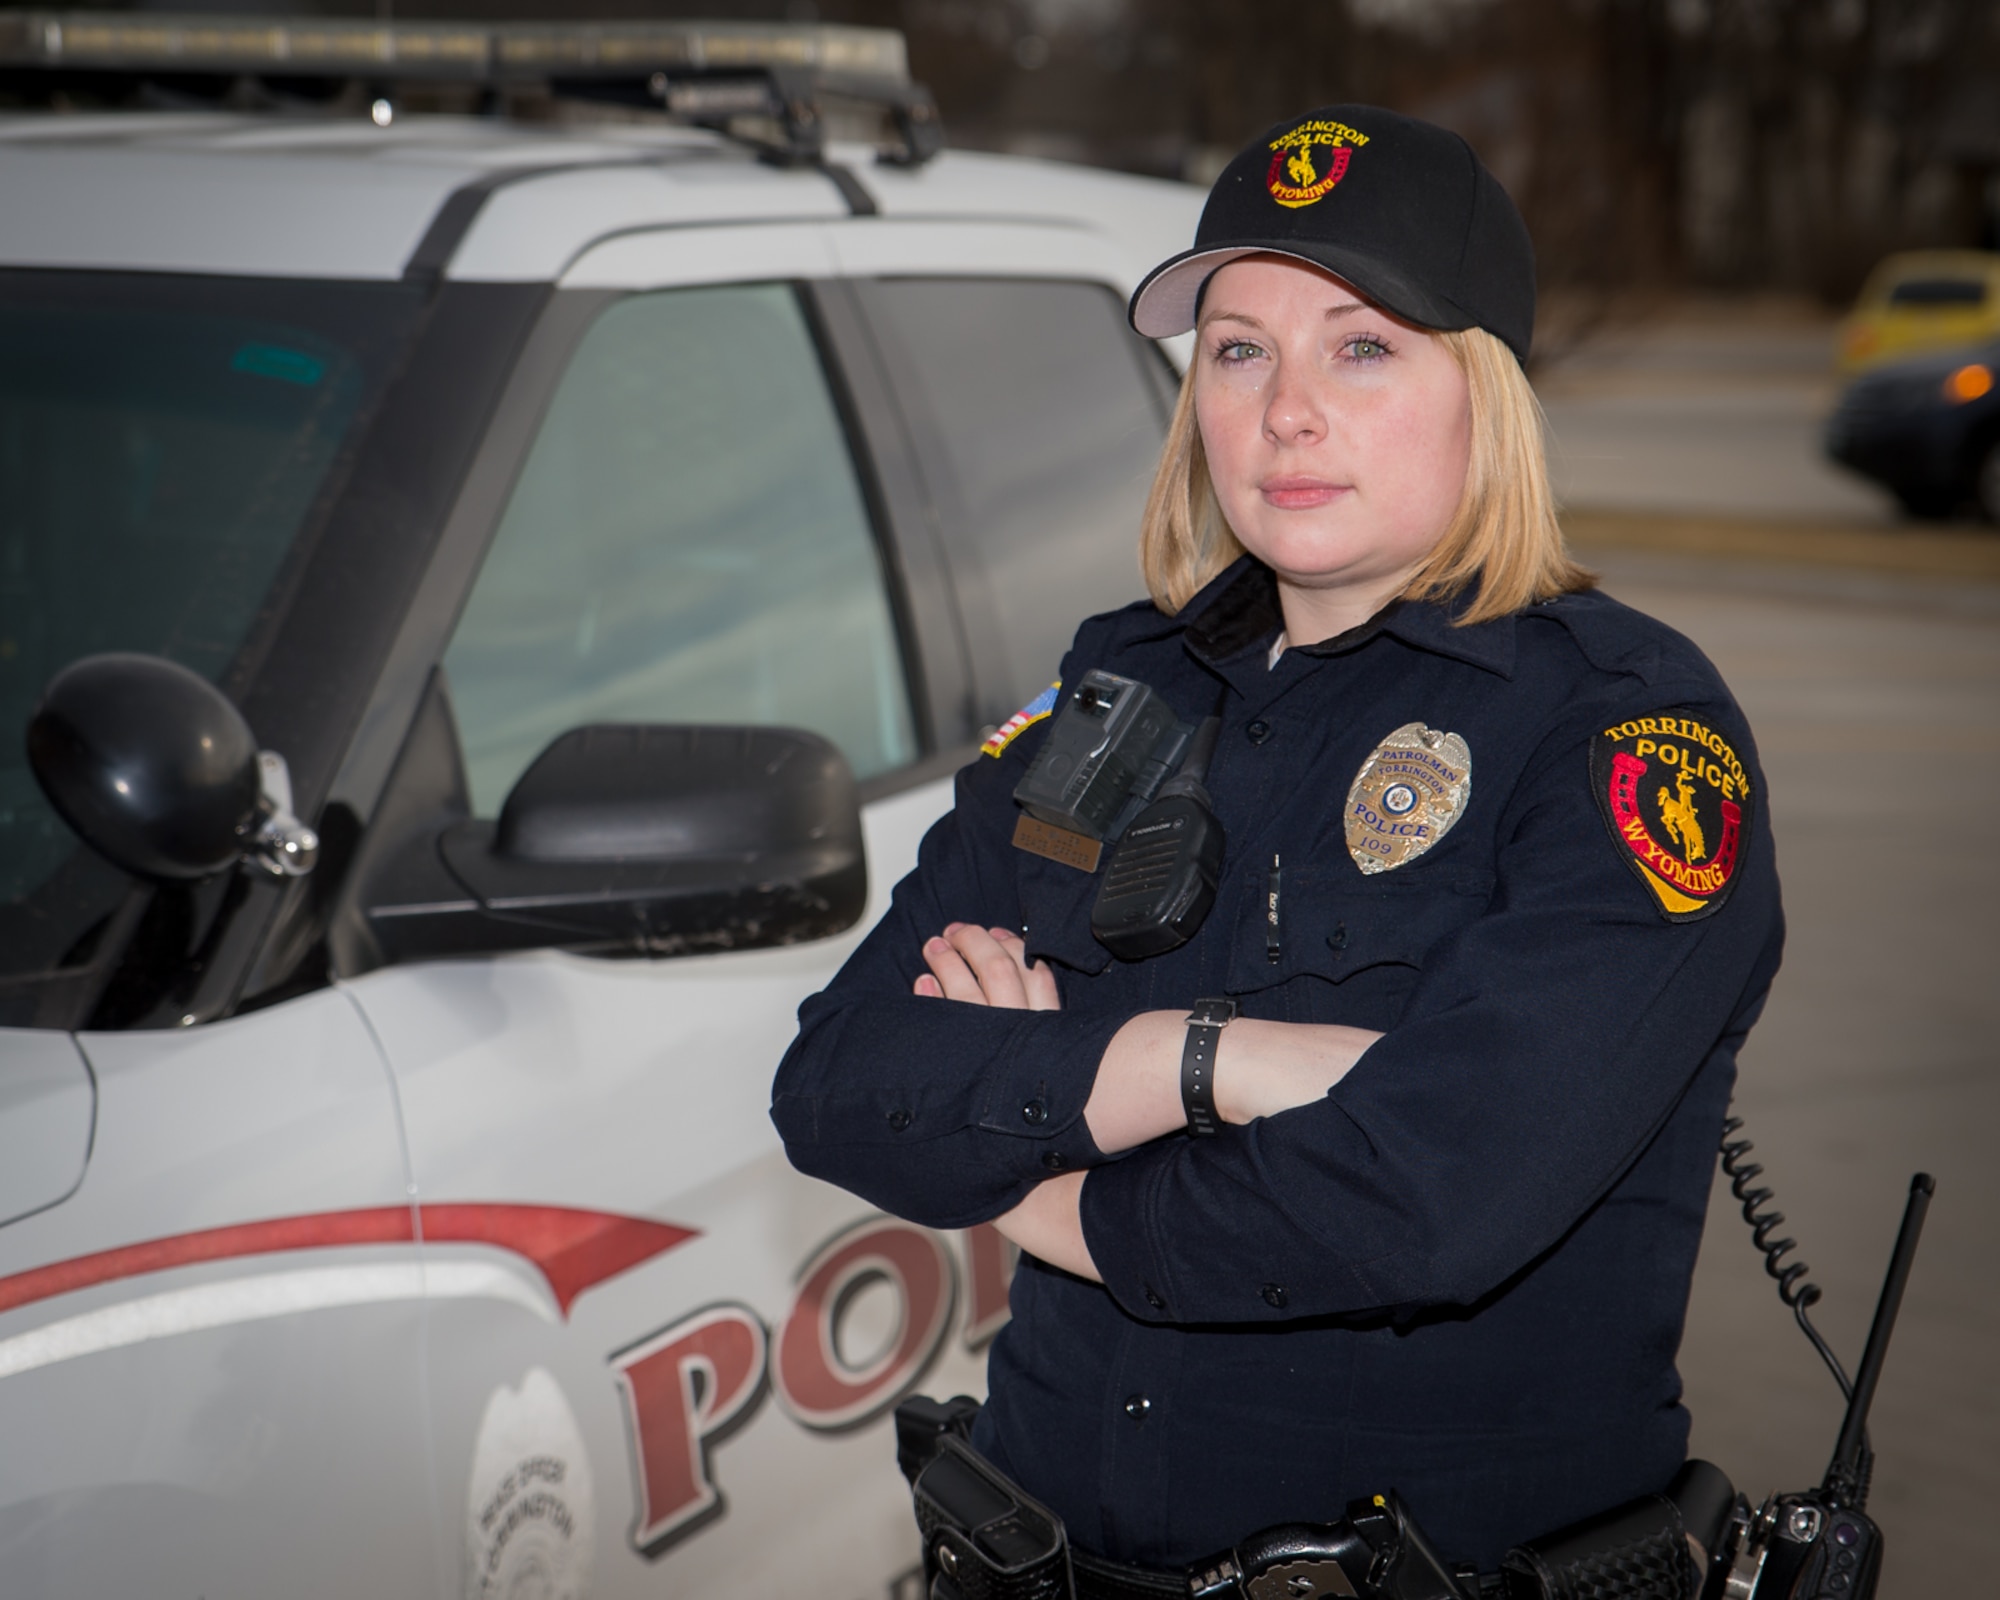 U.S. Air Force Staff Sgt. Rebekah Miller stands next to a Torrington police vehicle while wearing her police uniform, Mar. 10, 2017 in Torrington, Wyoming. Miller has been with the Wyoming Air National Guard for six years and is serving as a command post specialist. She has also been an officer with the Torrington police department for two years. (U.S. Air National Guard photo by Senior Master Sgt. Charles Delano/released)